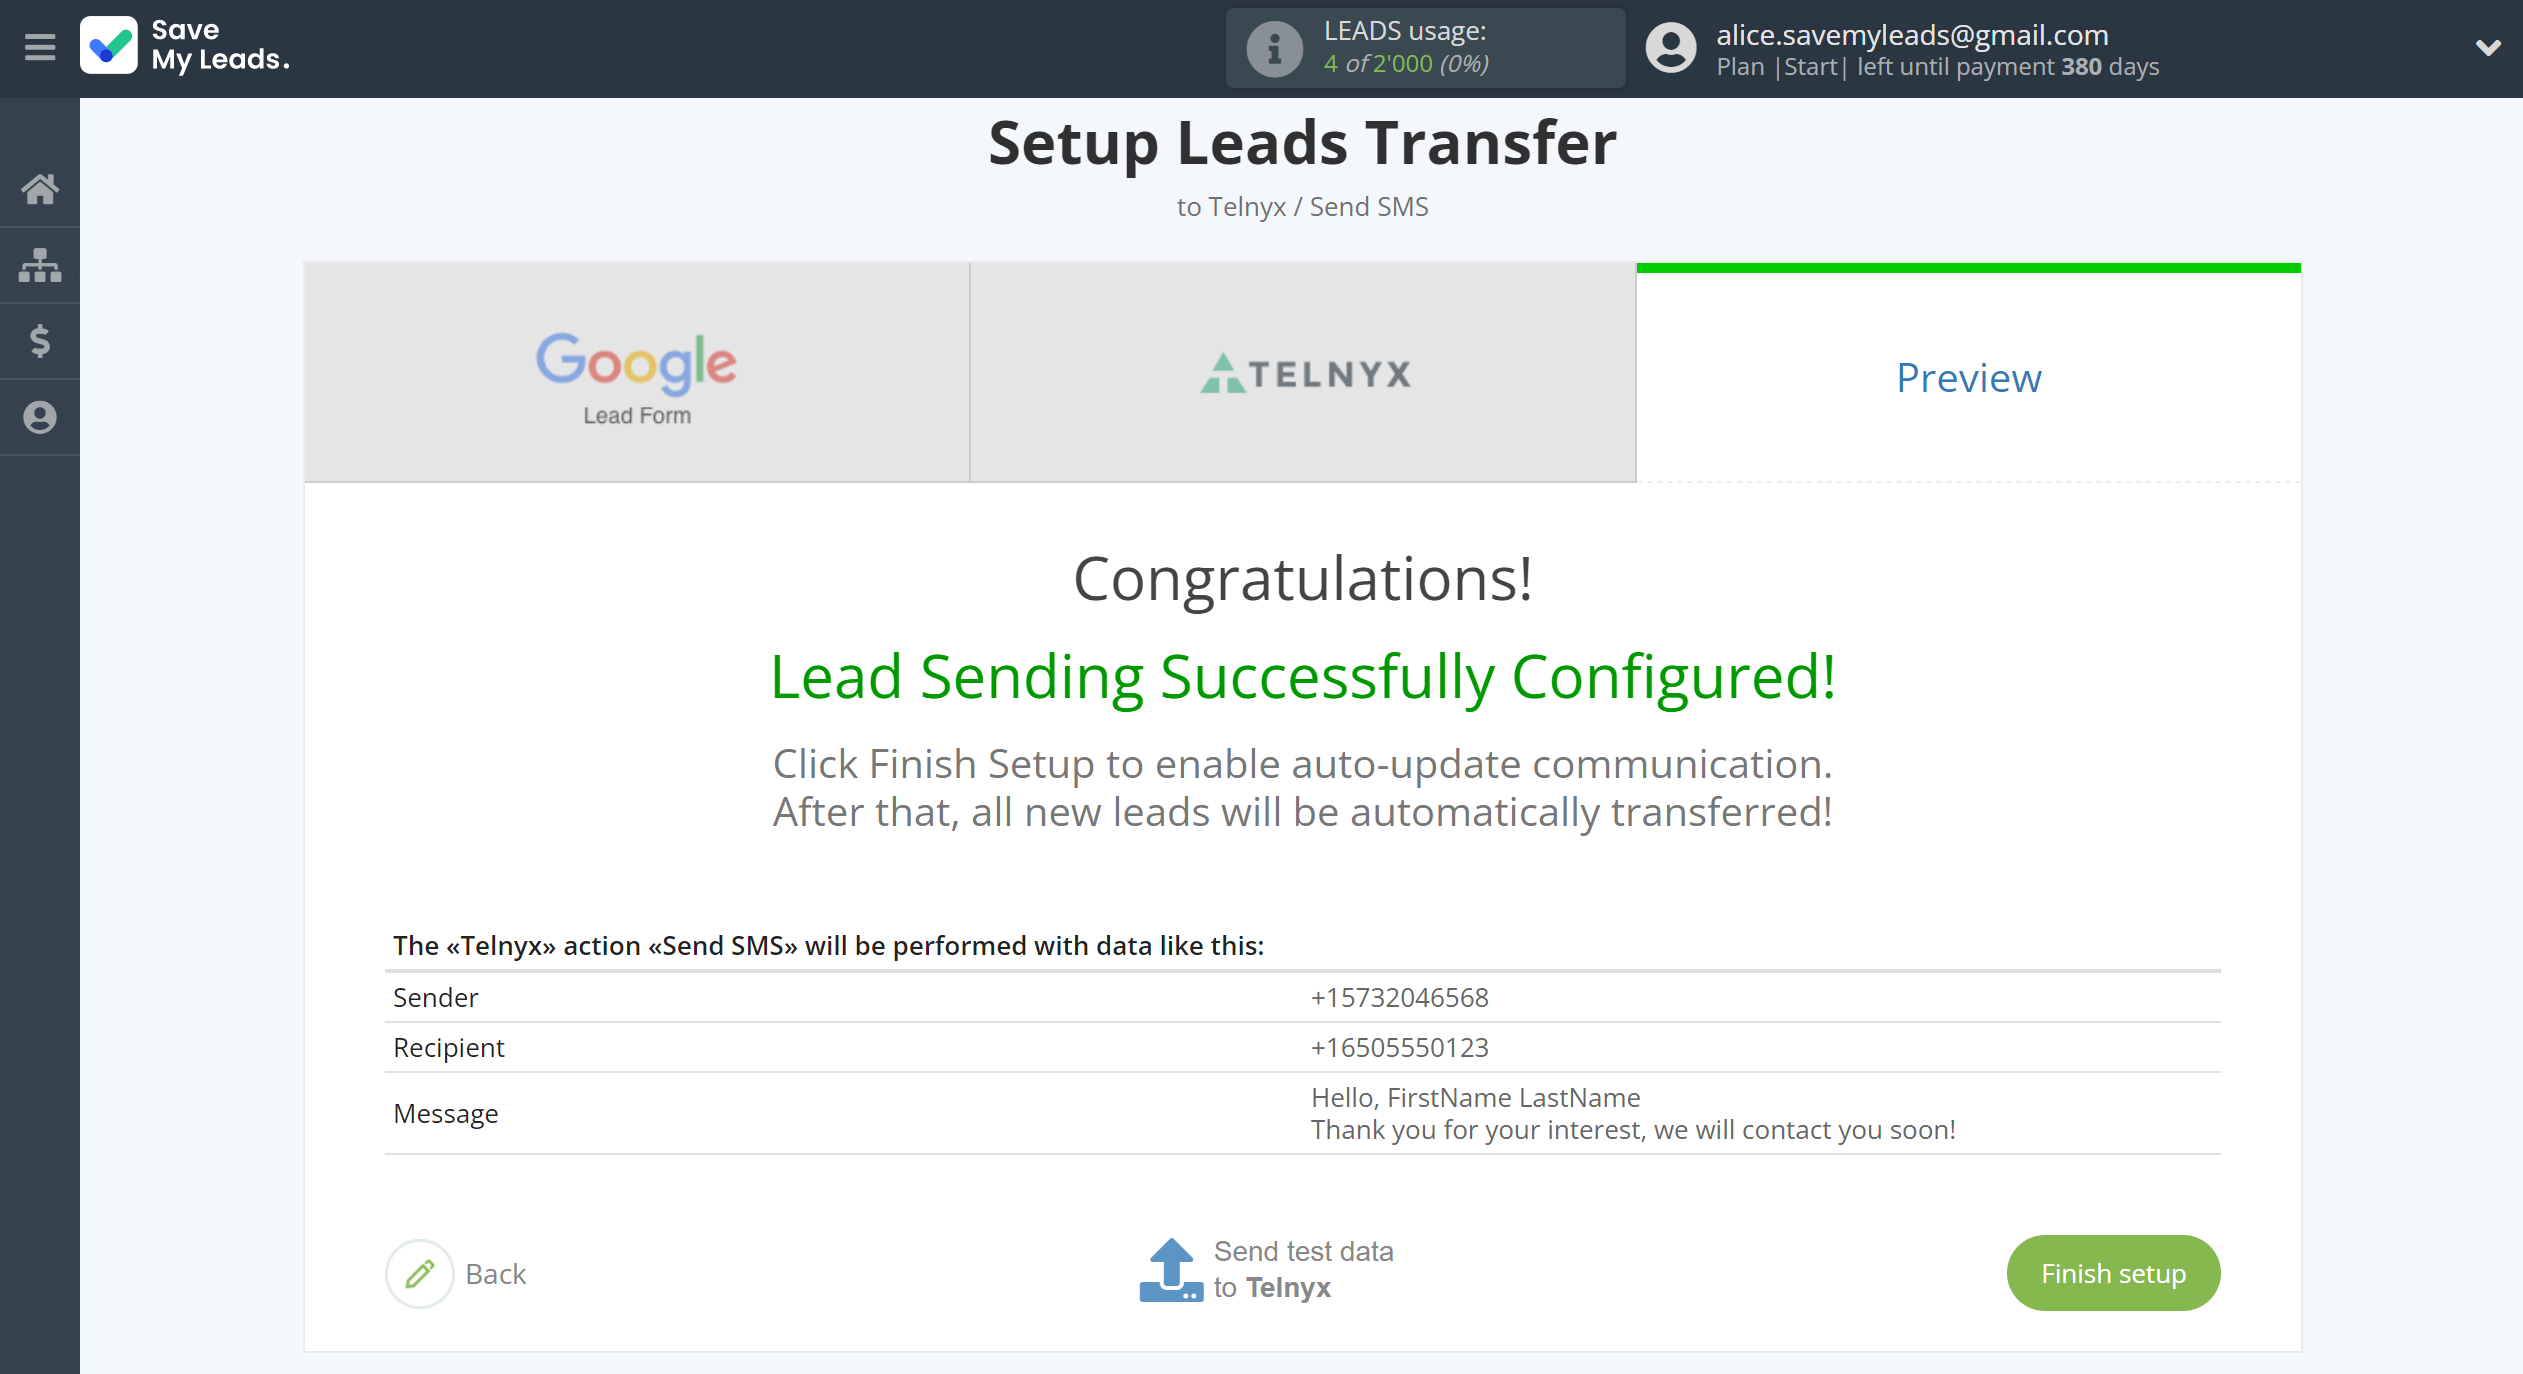 How to Connect Google Lead Form with Telnyx | Test data